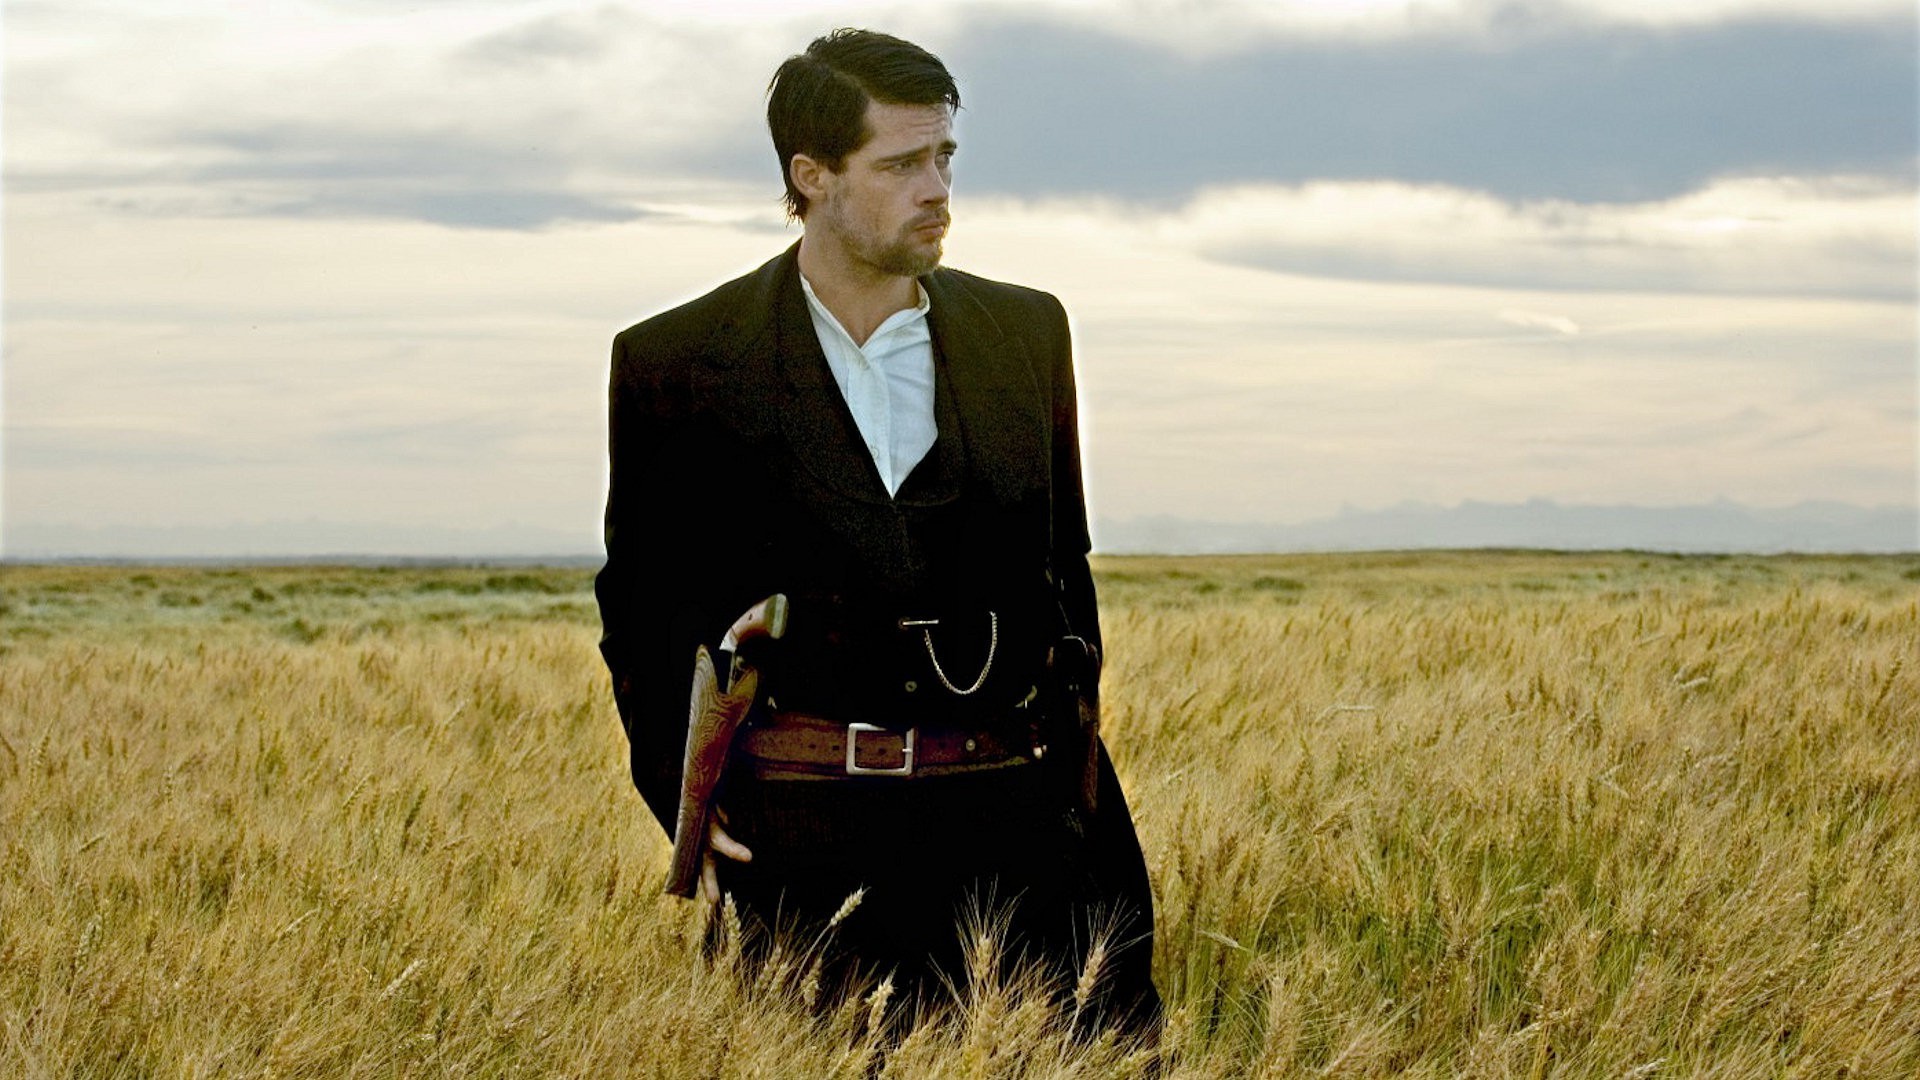 1920x1080 The Assassination Of Jesse James By The Coward Robert Ford, Brad Pitt,  Movies, Western Wallpapers HD / Desktop and Mobile Backgrounds